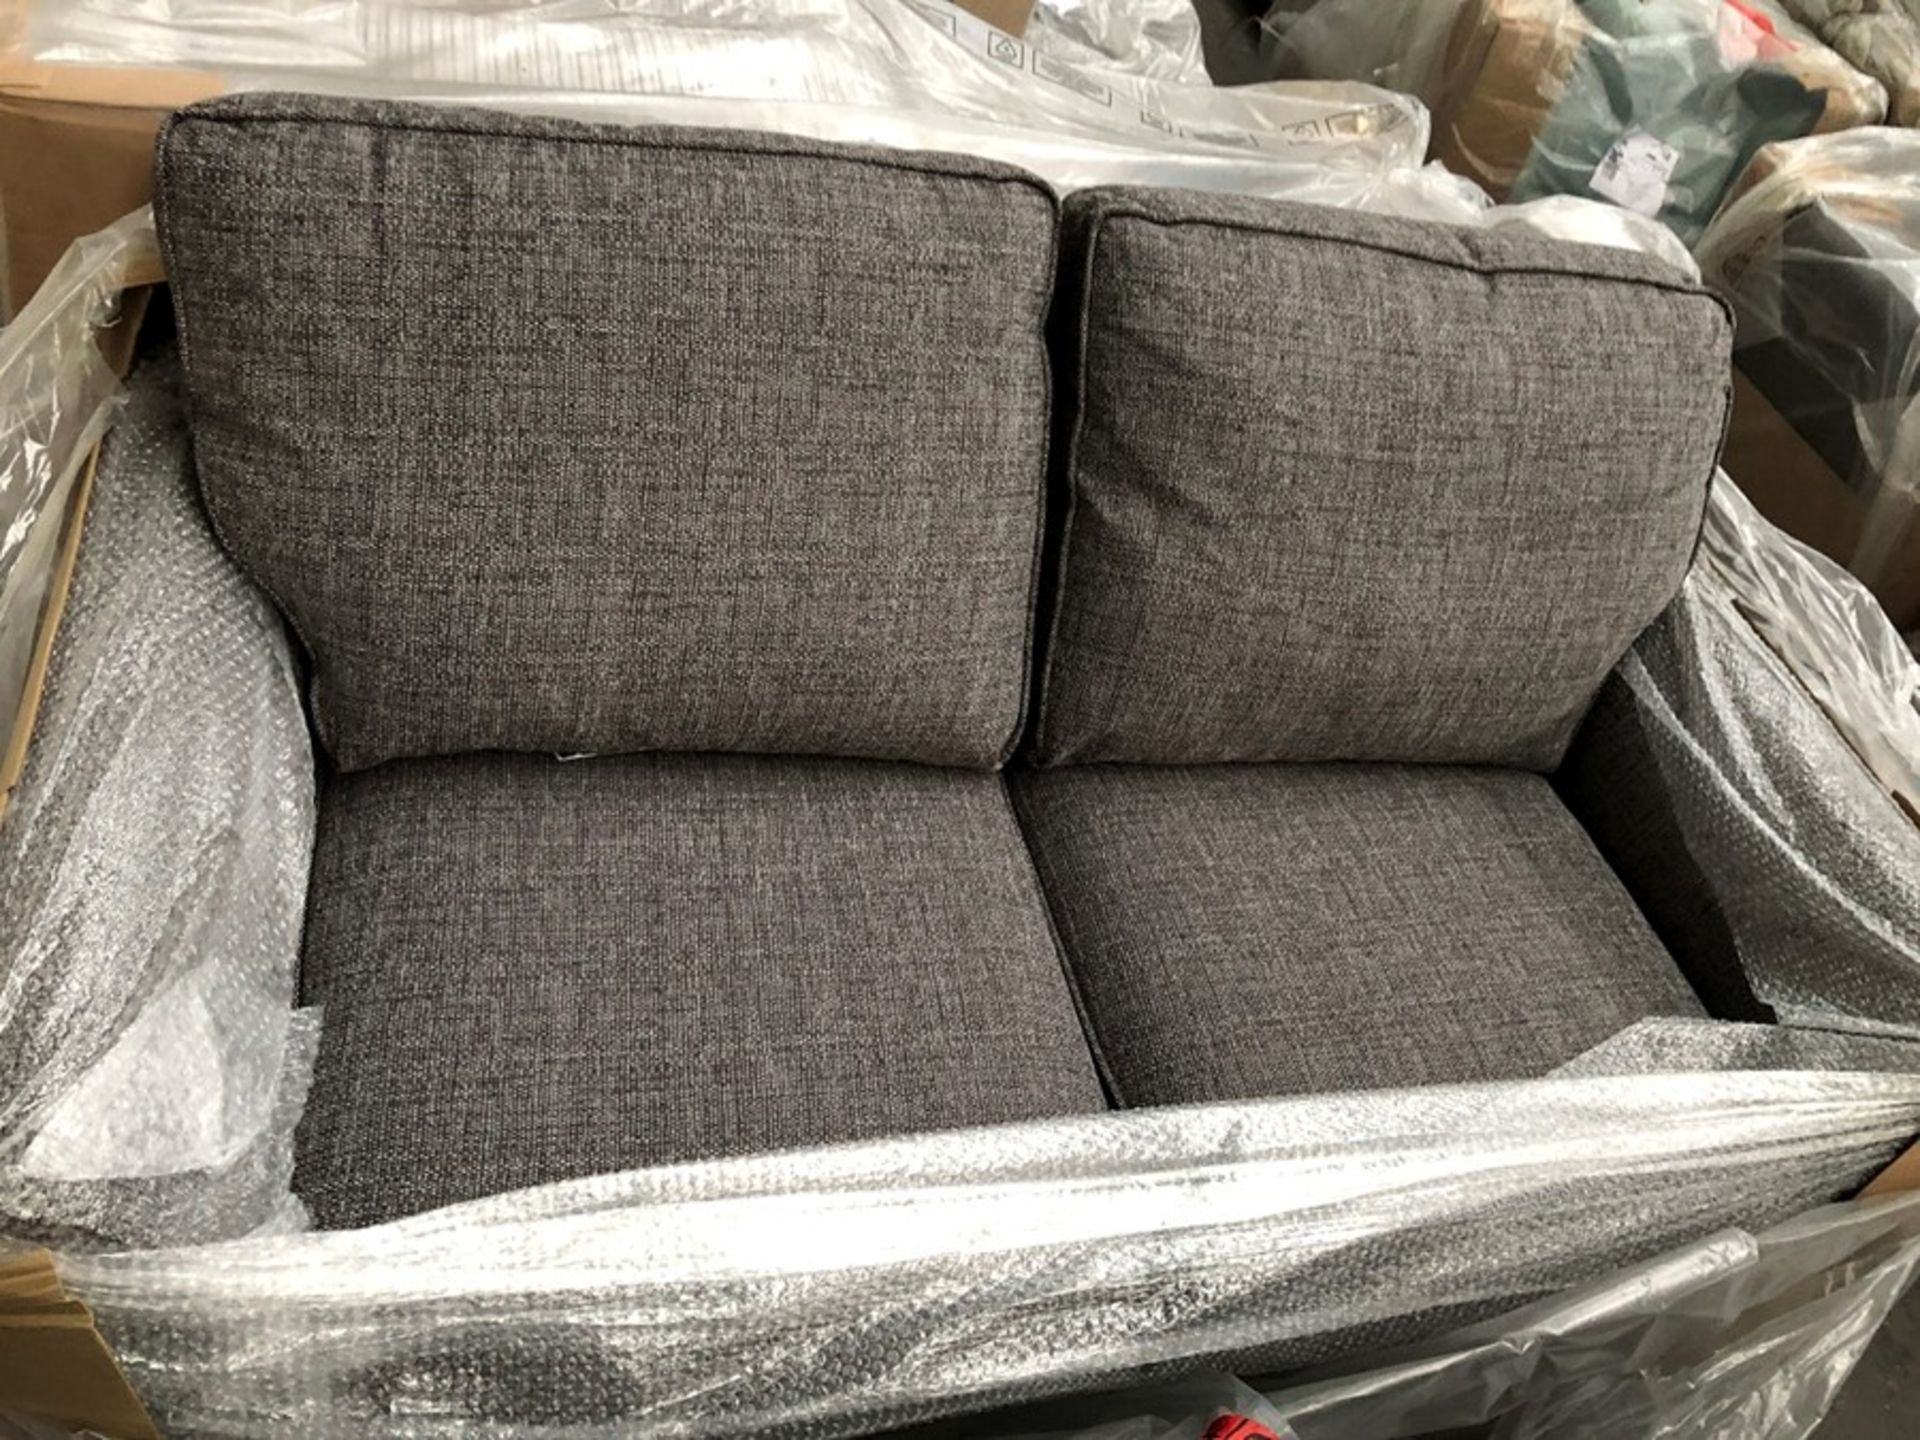 1 BRAND NEW BAGGED FABB SOFAS FYFIELD 2 SEATER SOFA IN BARLEY GREY (VIEWING HIGHLY RECOMMENDED)